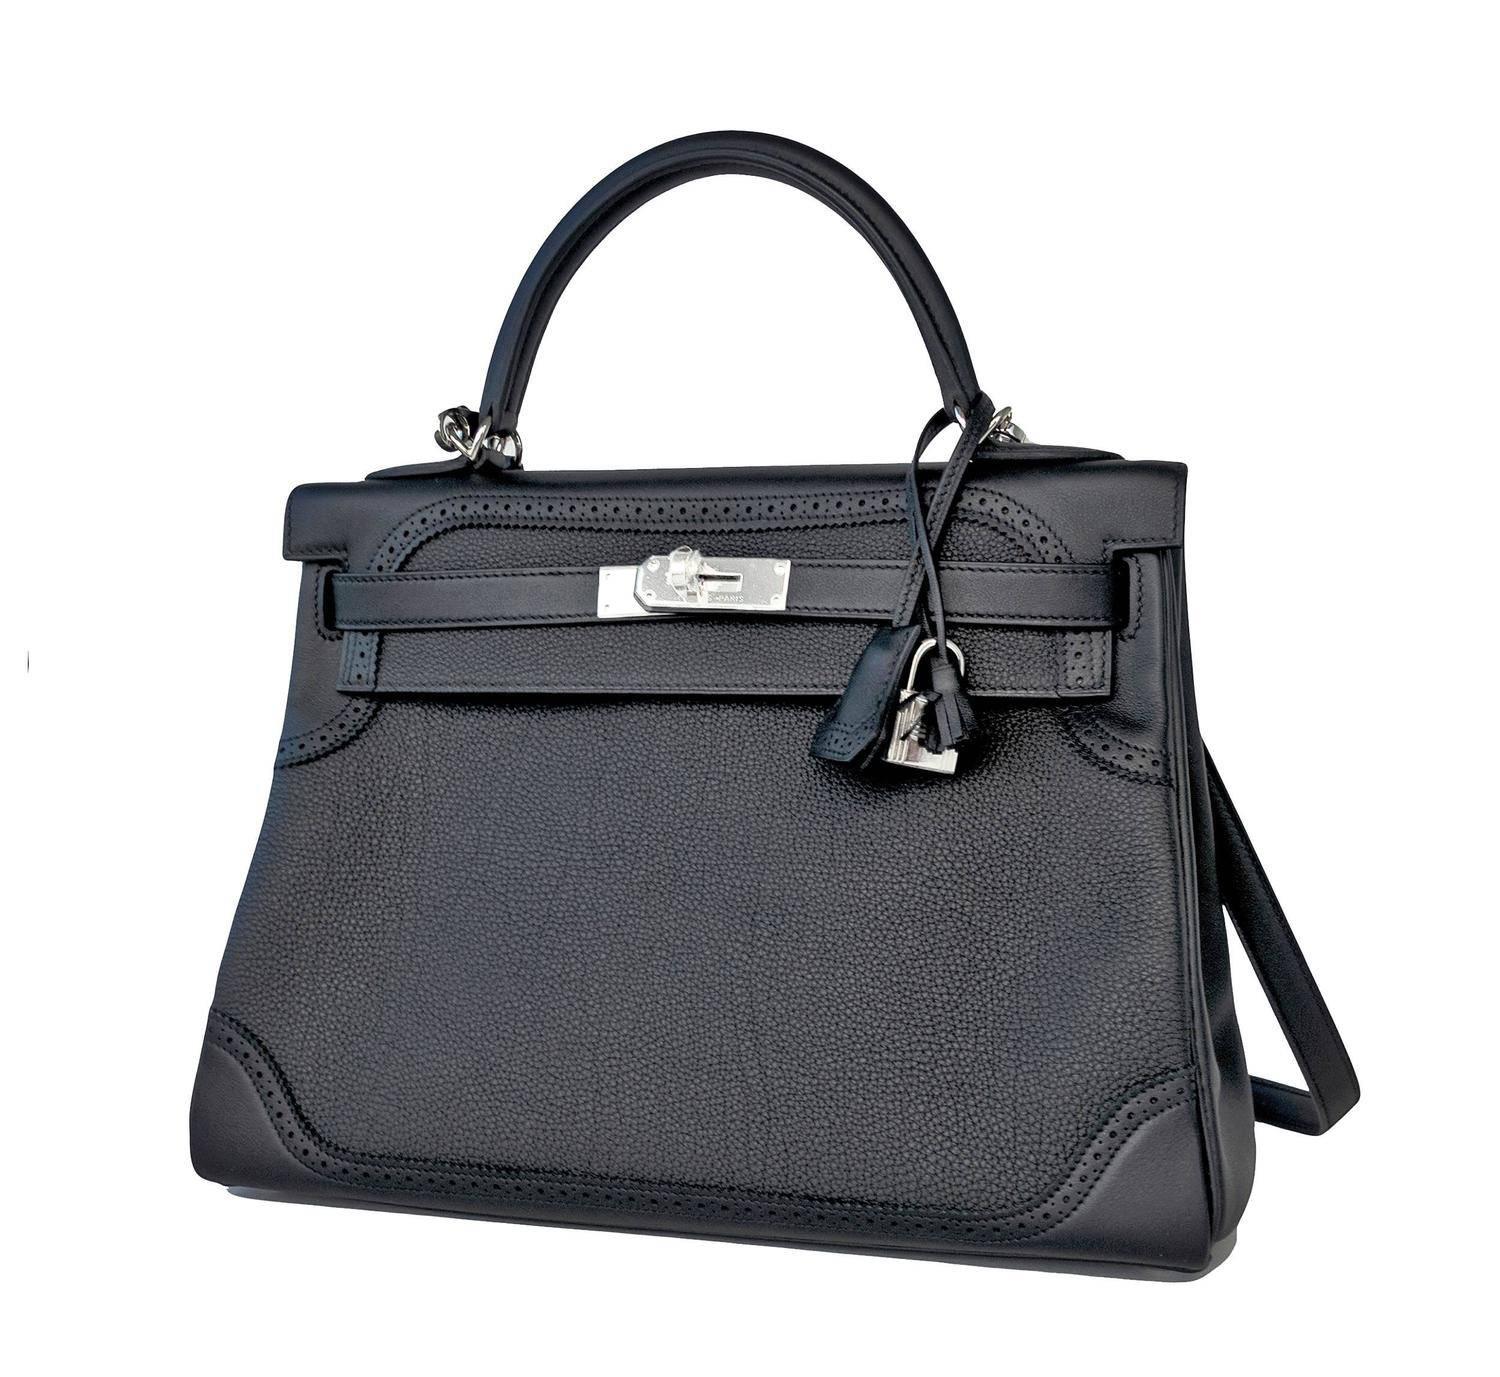 Hermes Black Ghillies Limited Edition 32cm Kelly Togo Swift Shoulder Bag Rare
Brand New in Box.  Store Fresh.  Pristine Condition.
Perfect gift!  Comes full set with keys, lock, clochette, a sleeper for the bag, rain protector, felt protective